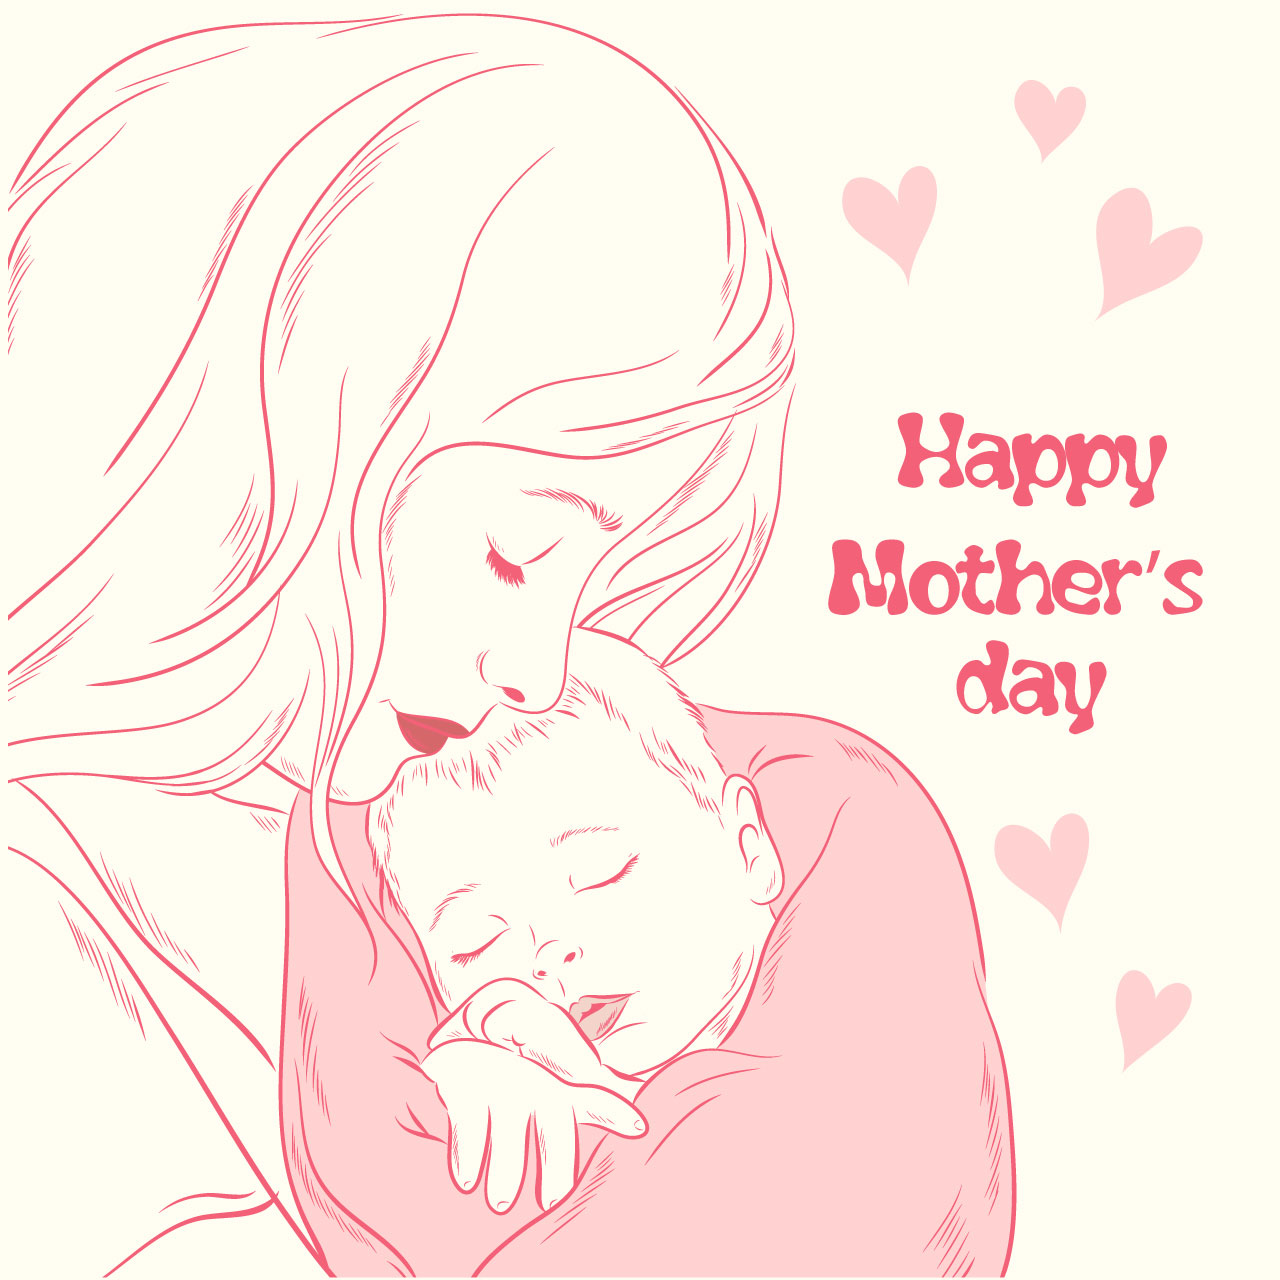 Red heart clipart happy mothers day cartoon illustration image